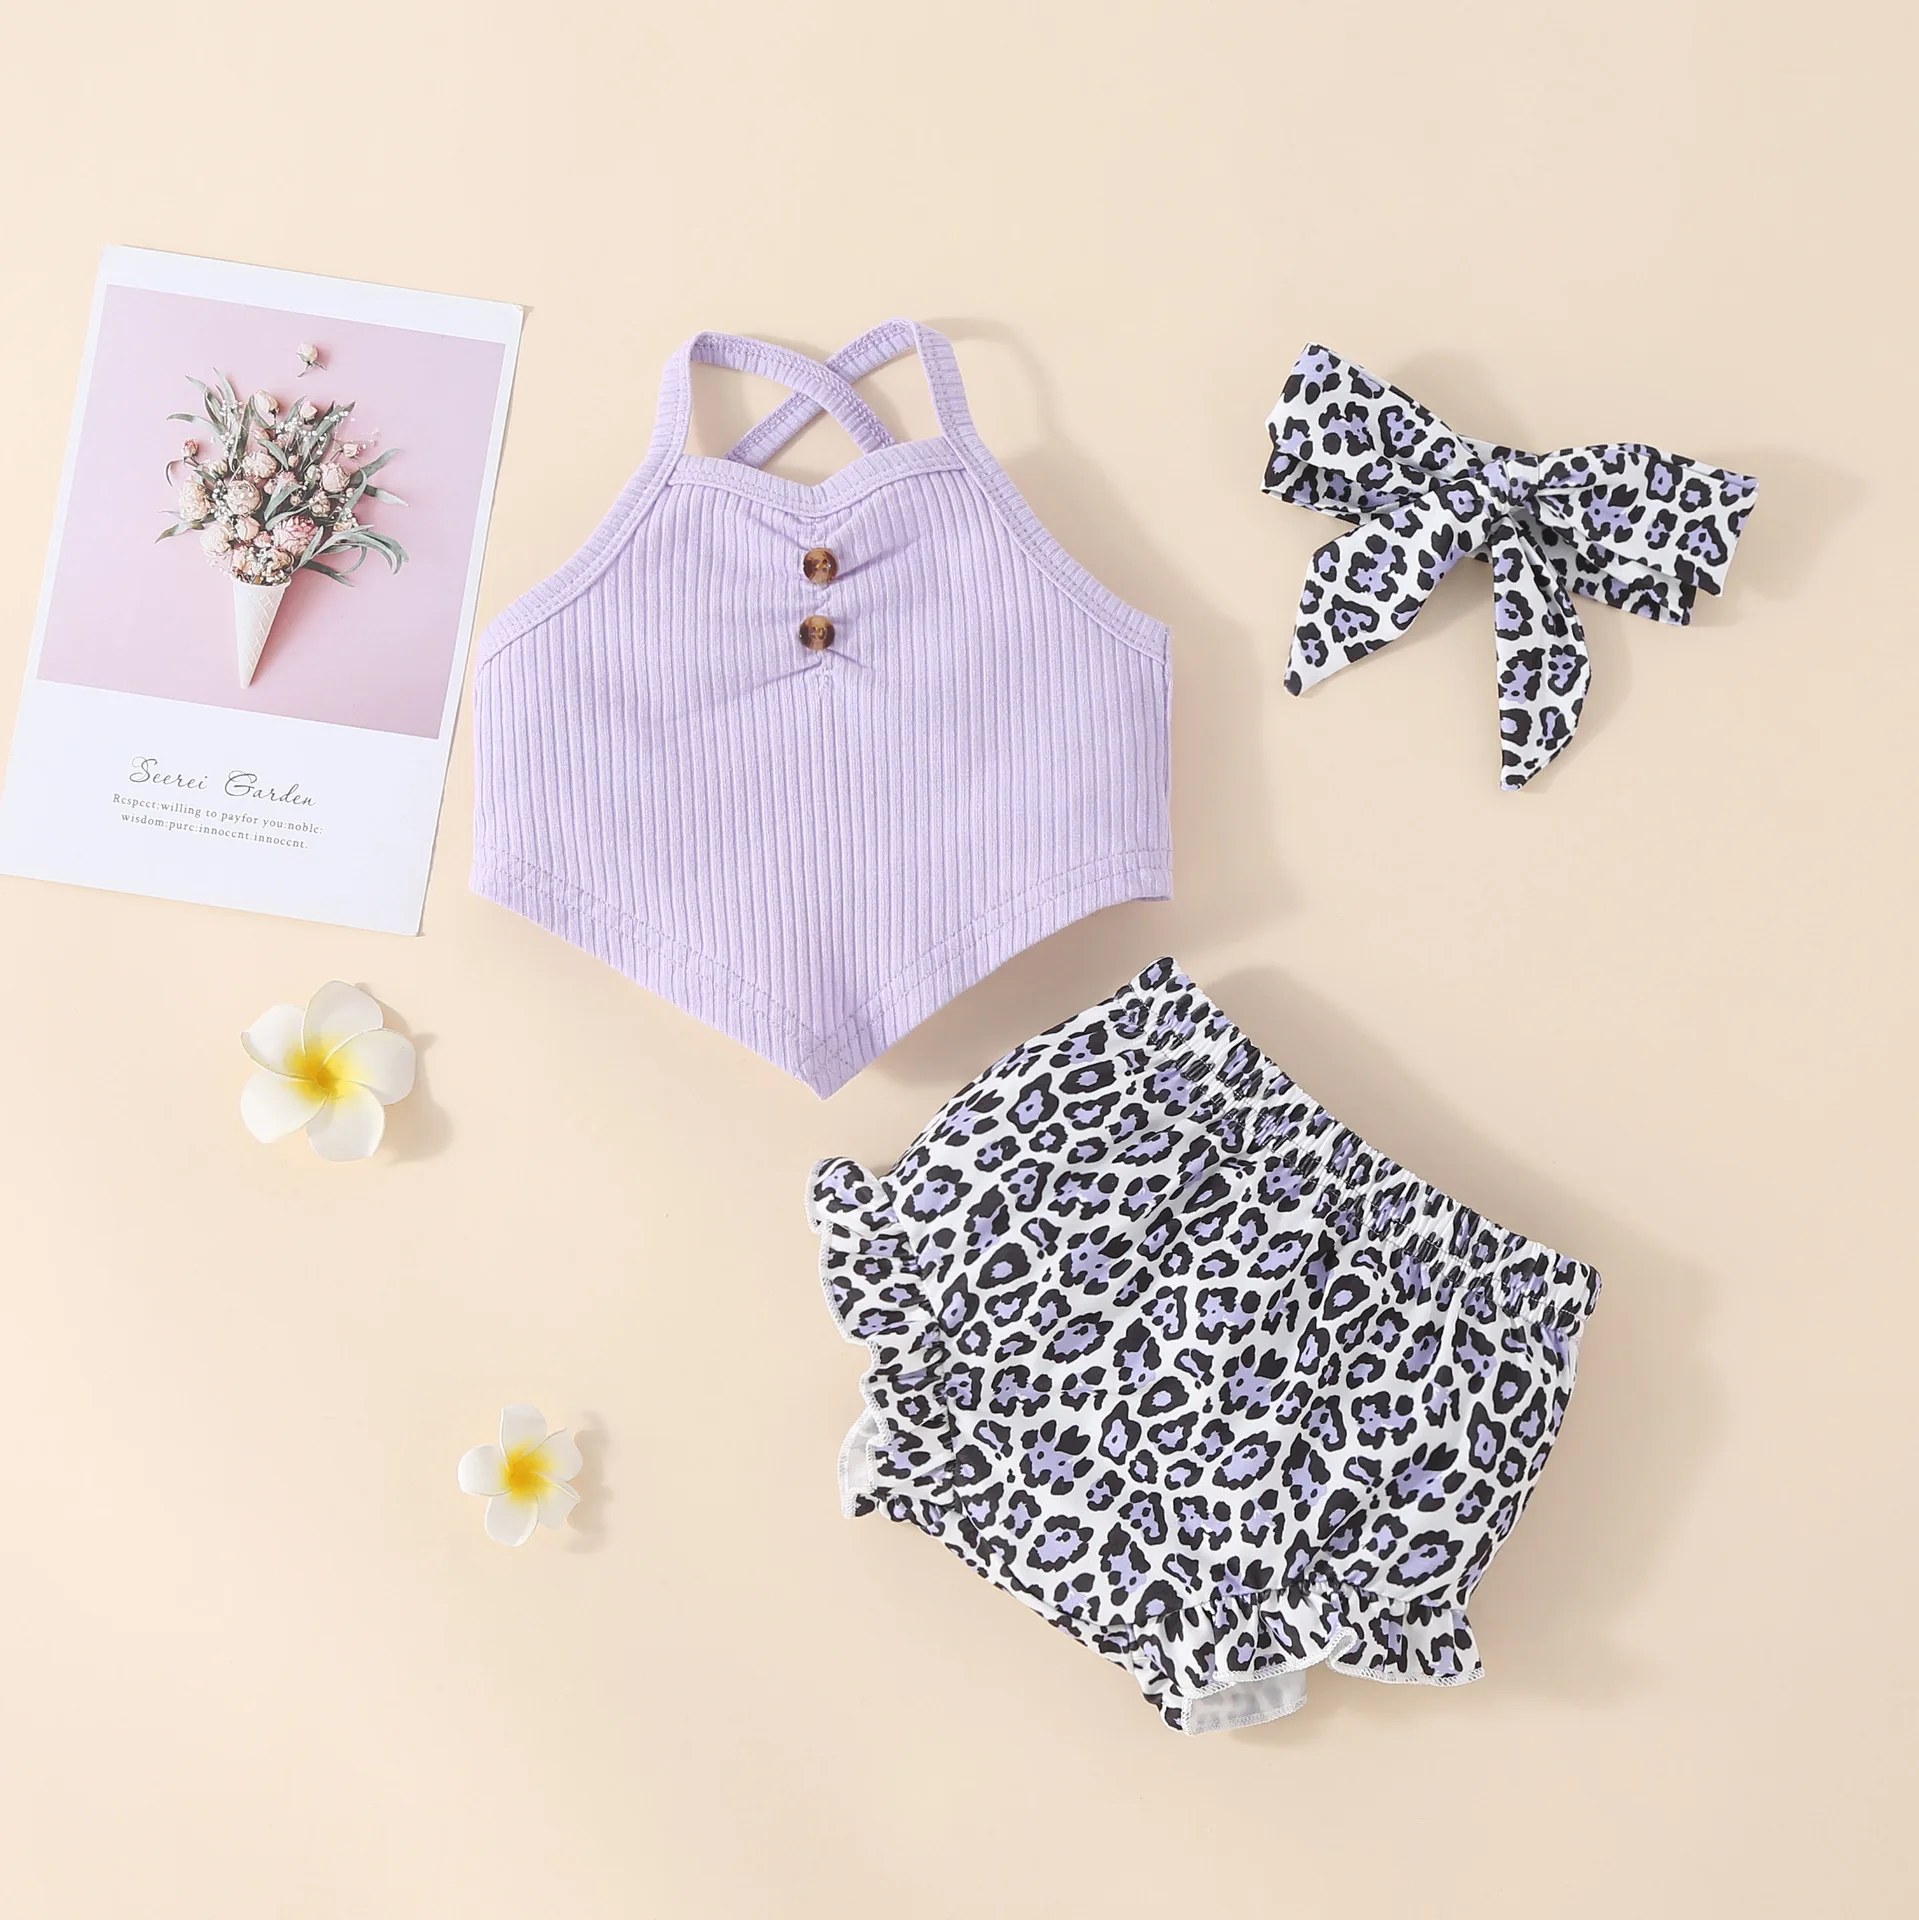 3PCS Newborn Baby Girls Clothes Summer Set Kids Child Vest Tops Sunflower Print Short Headband Toddler New Born Summer Outfits baby floral clothing set Baby Clothing Set